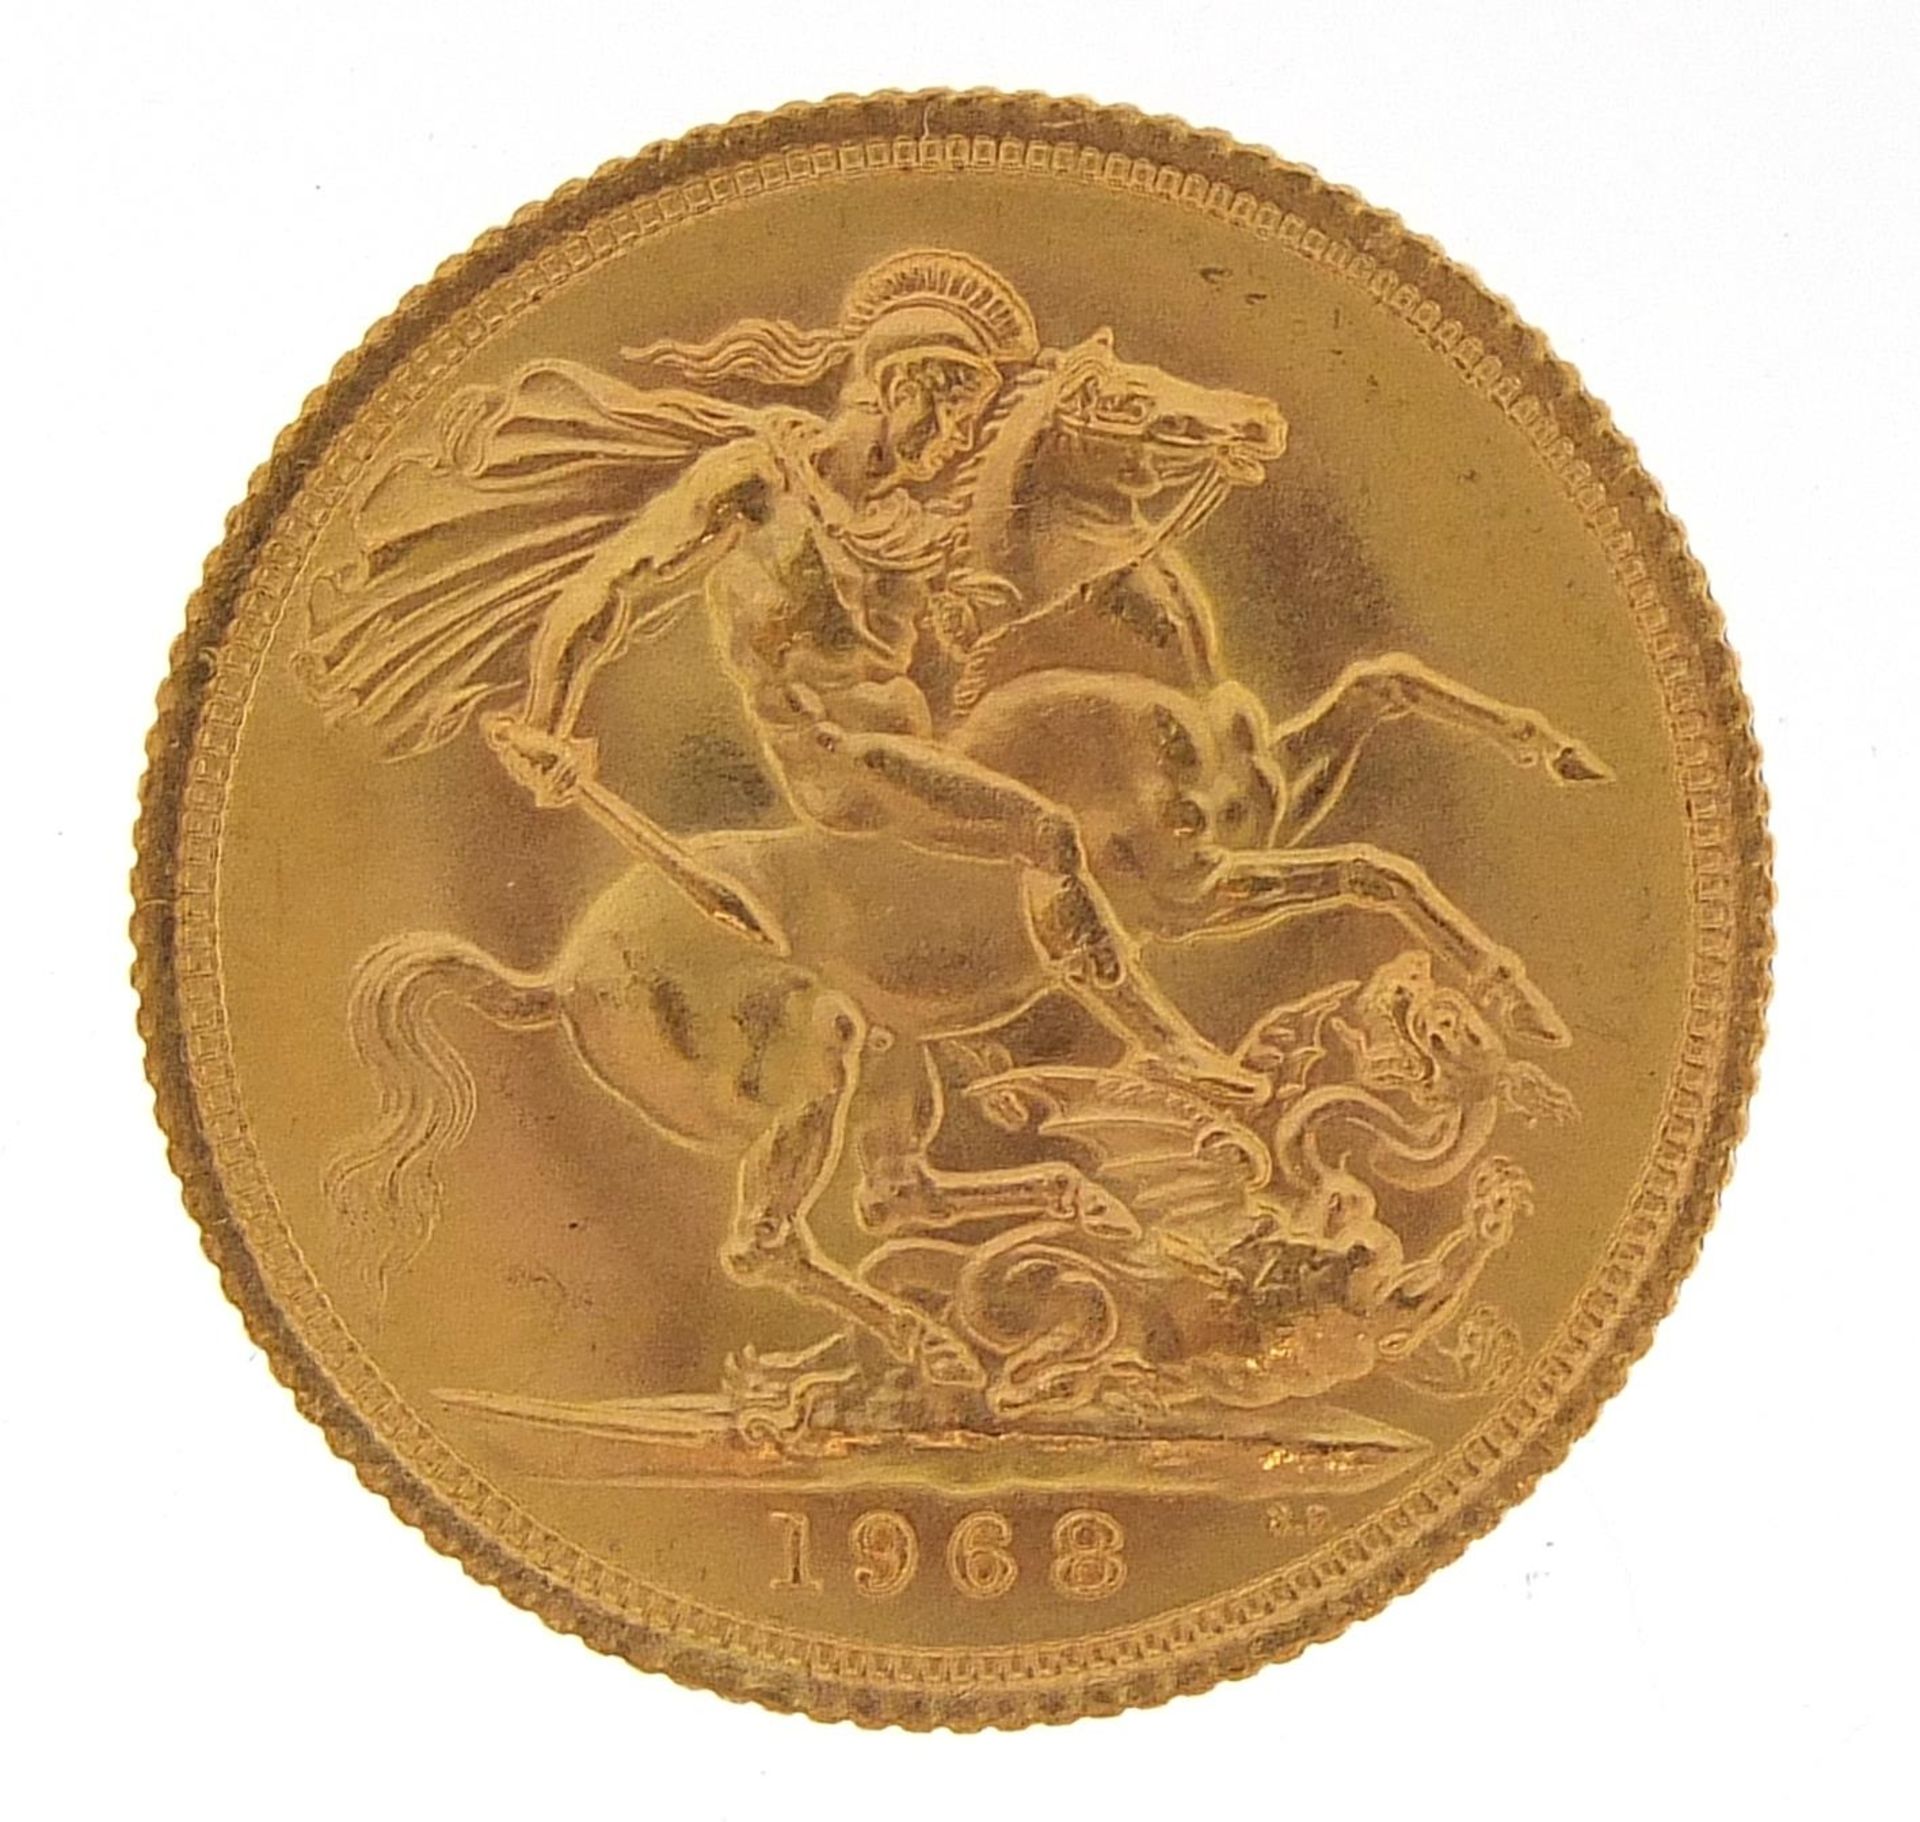 Elizabeth II 1968 gold sovereign - this lot is sold without buyer's premium